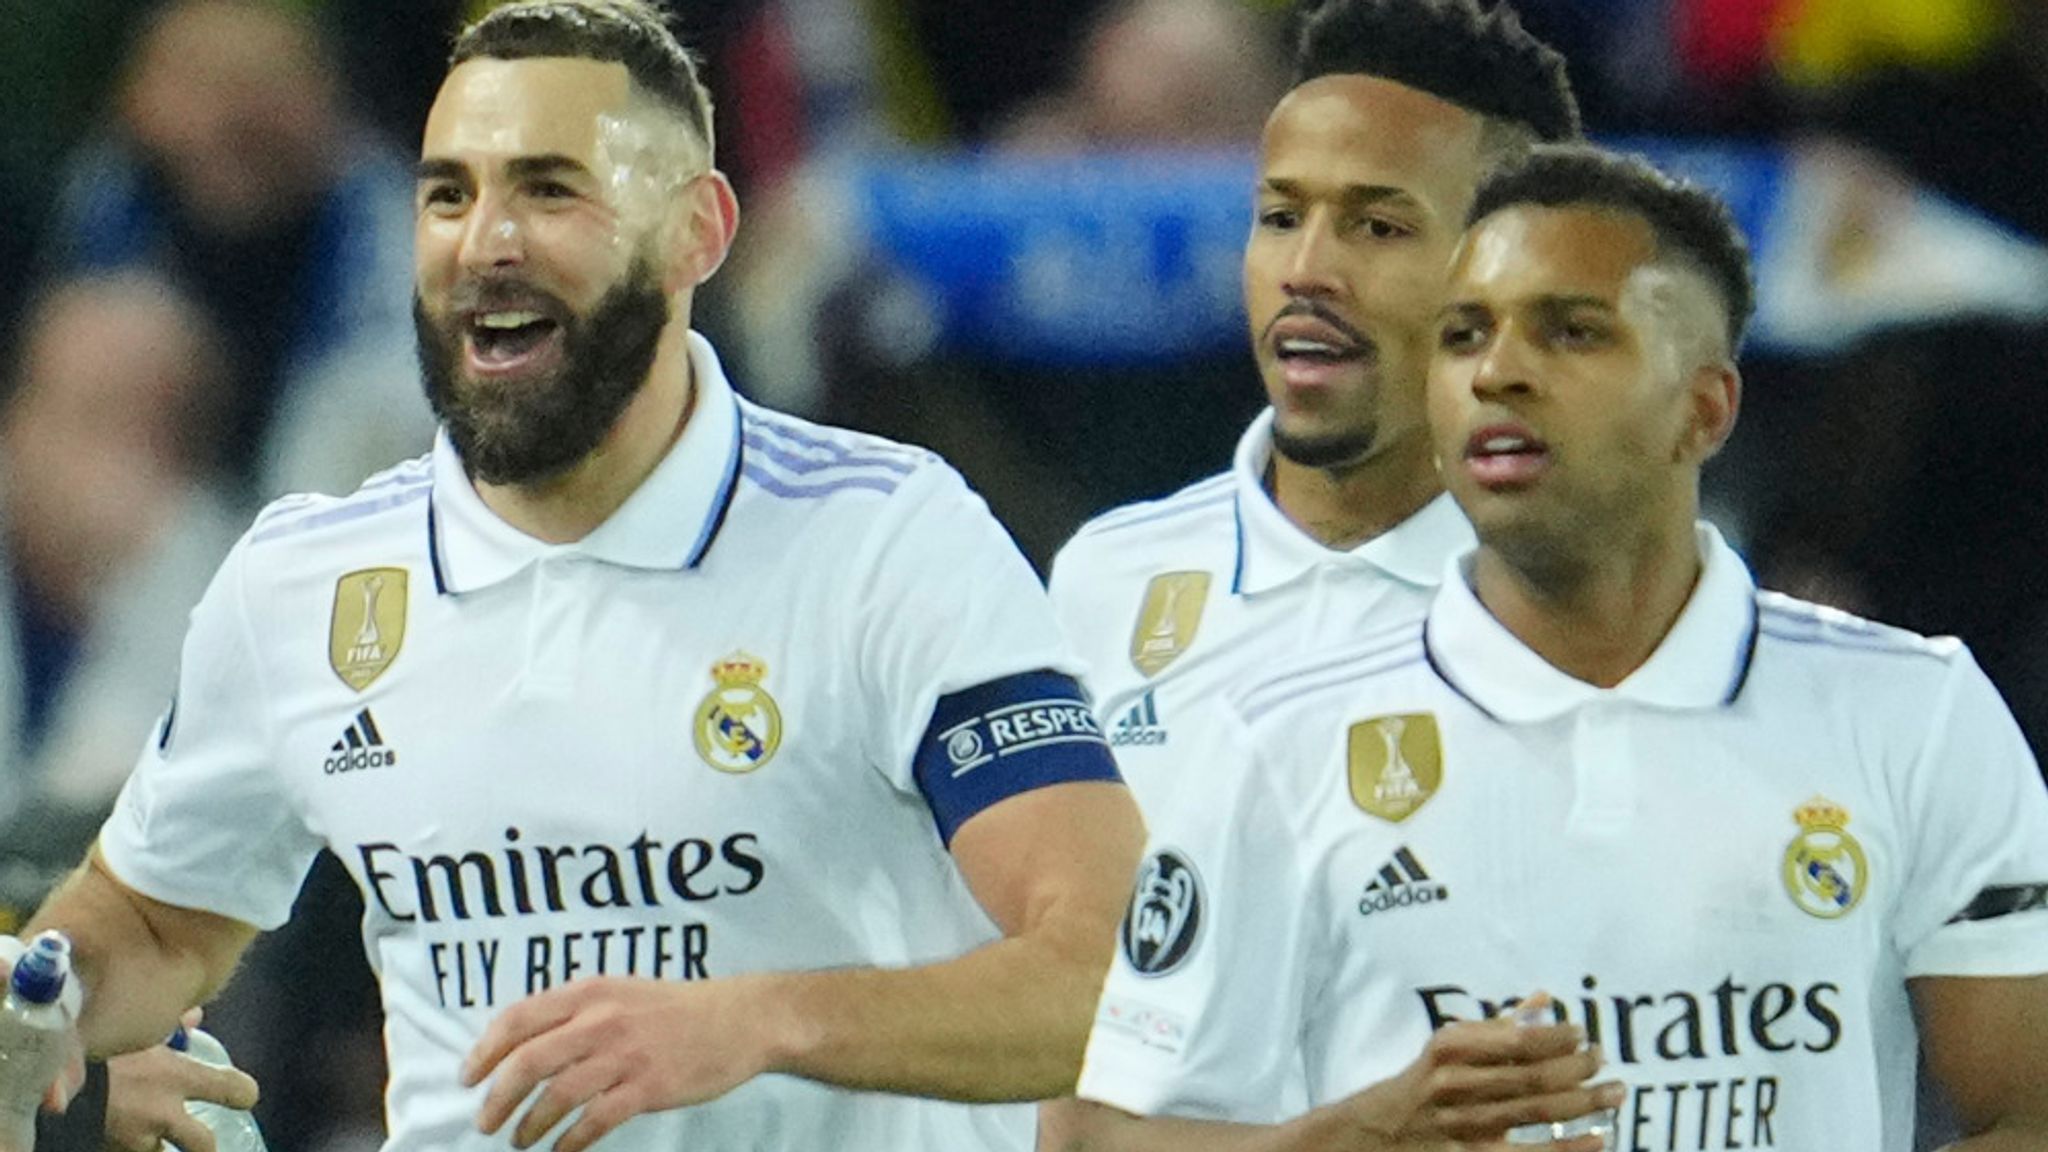 Liverpool 2-5 Real Madrid Vinicius inspires epic Champions League comeback to leave Jurgen Klopps Reds reeling Football News Sky Sports